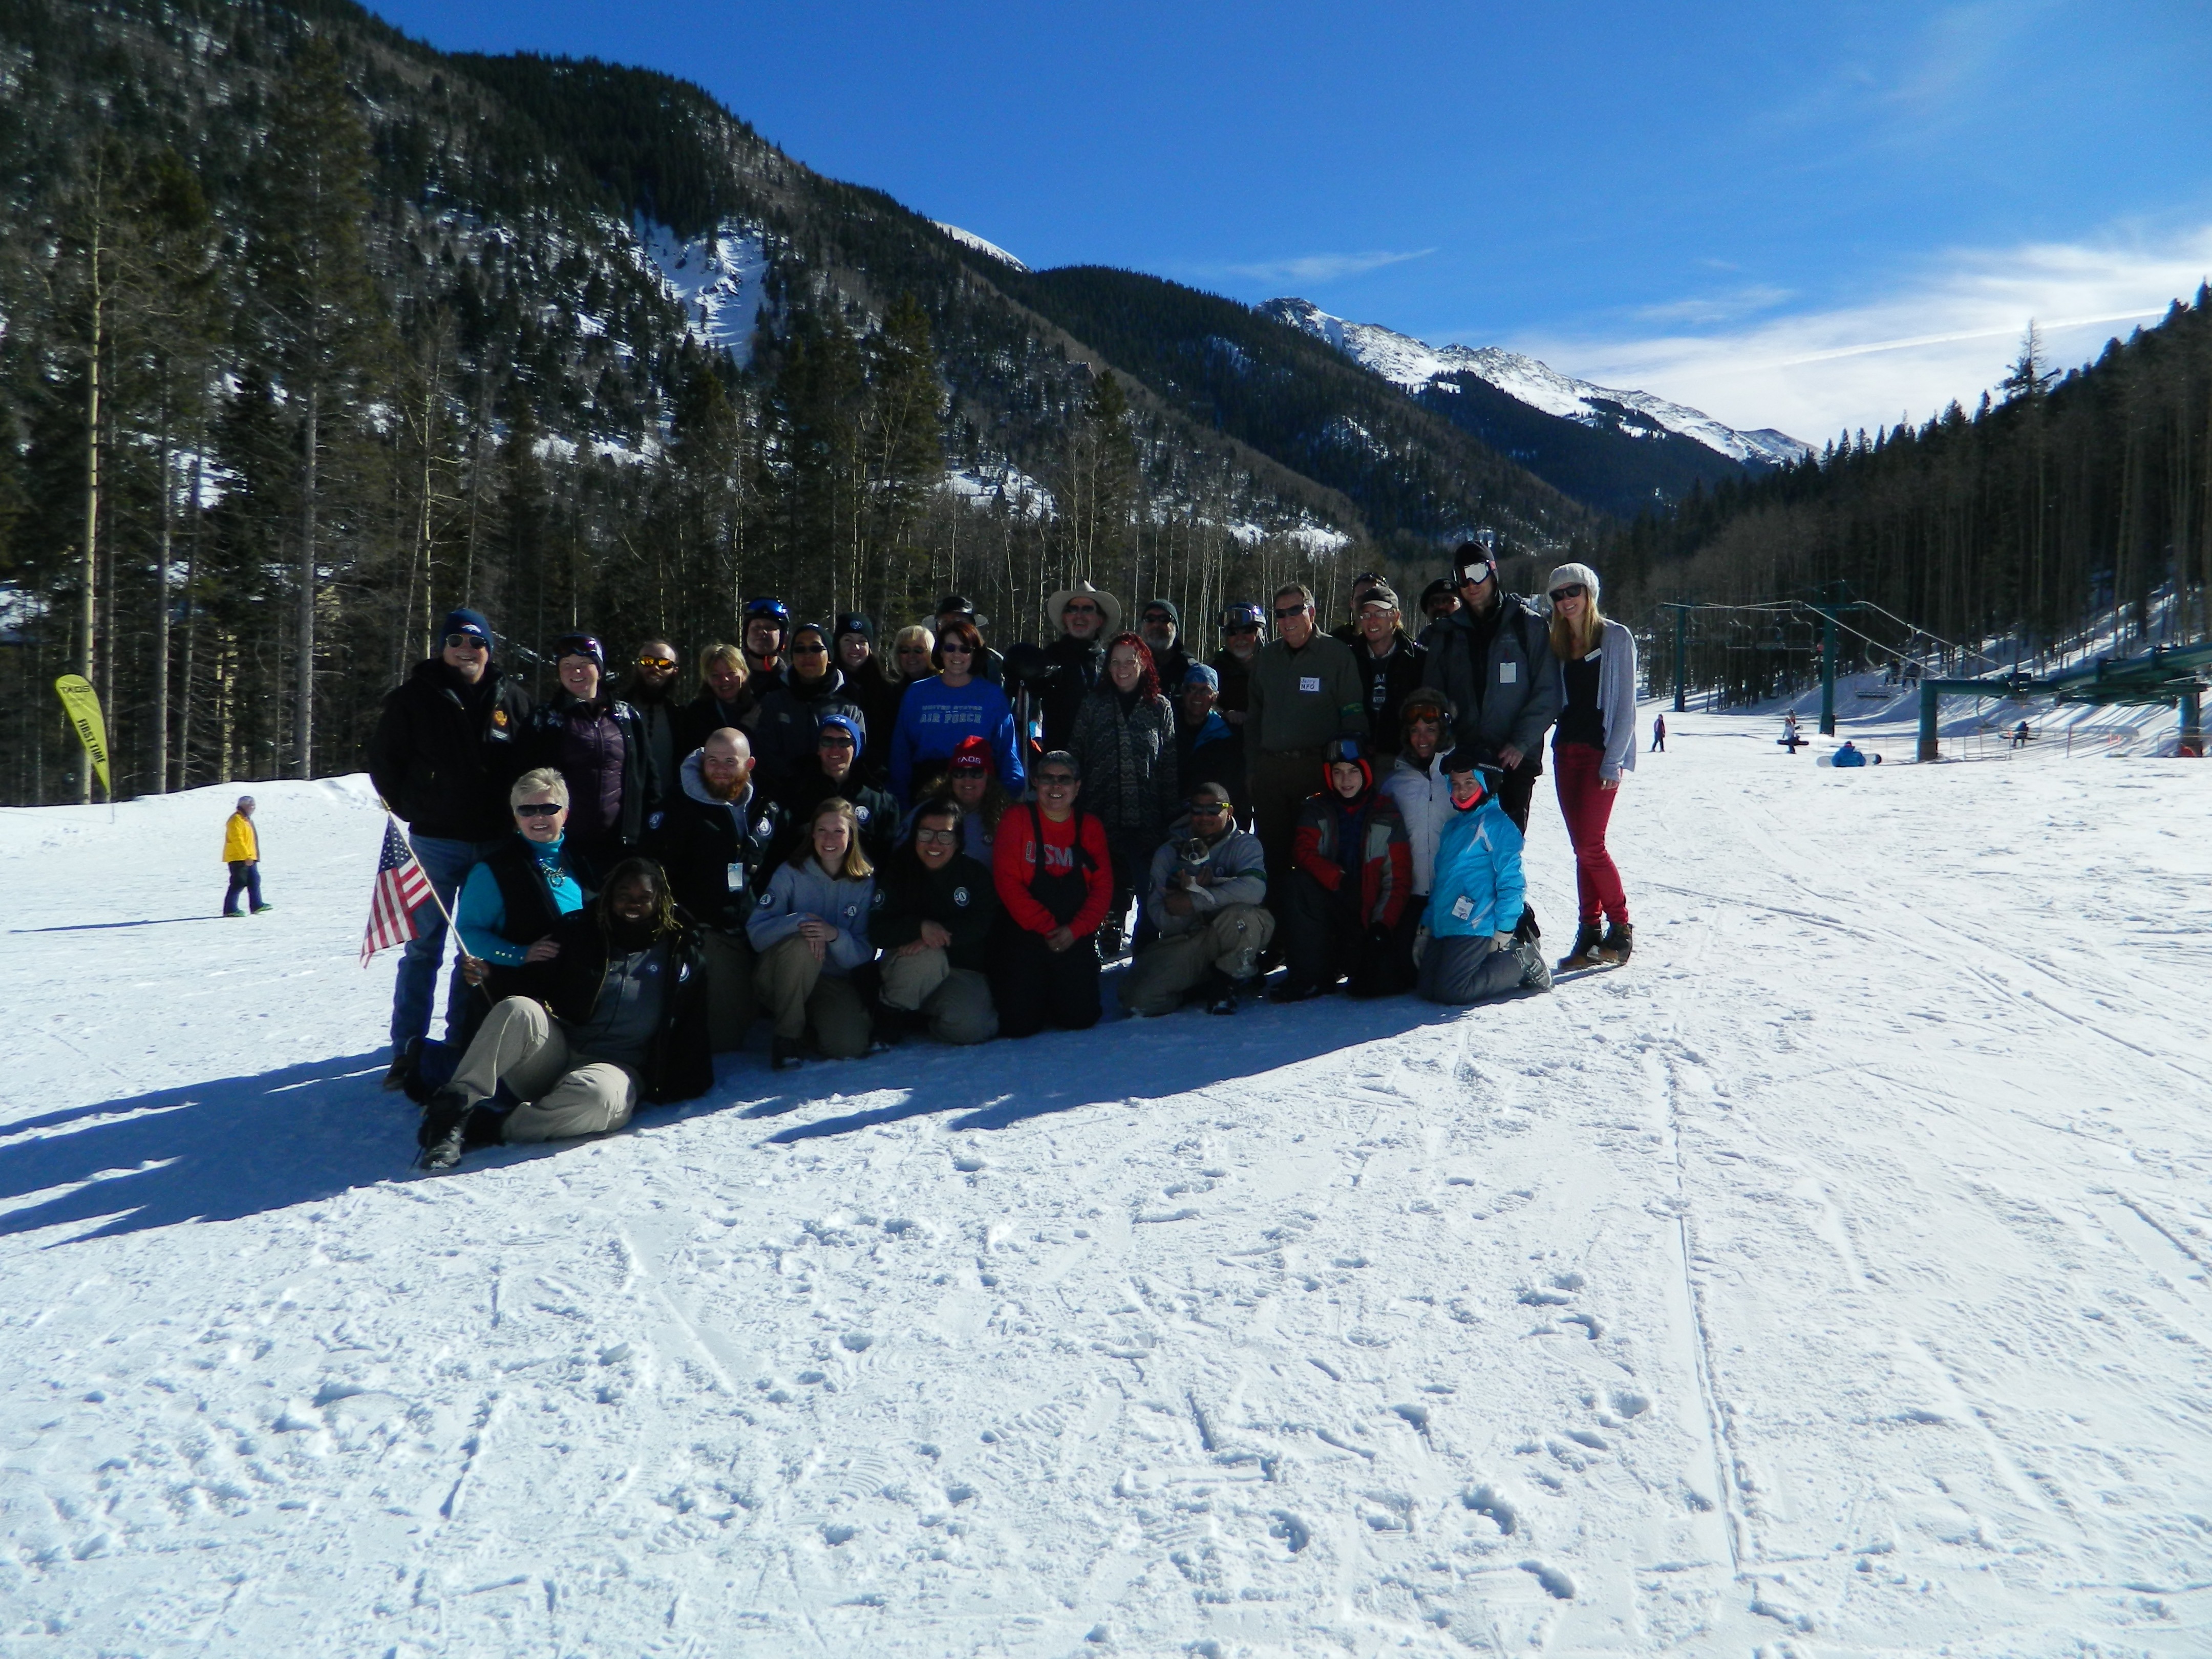 Not Forgotten Outreach group photo at the base of Taos Ski Valley. Chairlift, mountain peaks, blue sky, wintry forest behind.